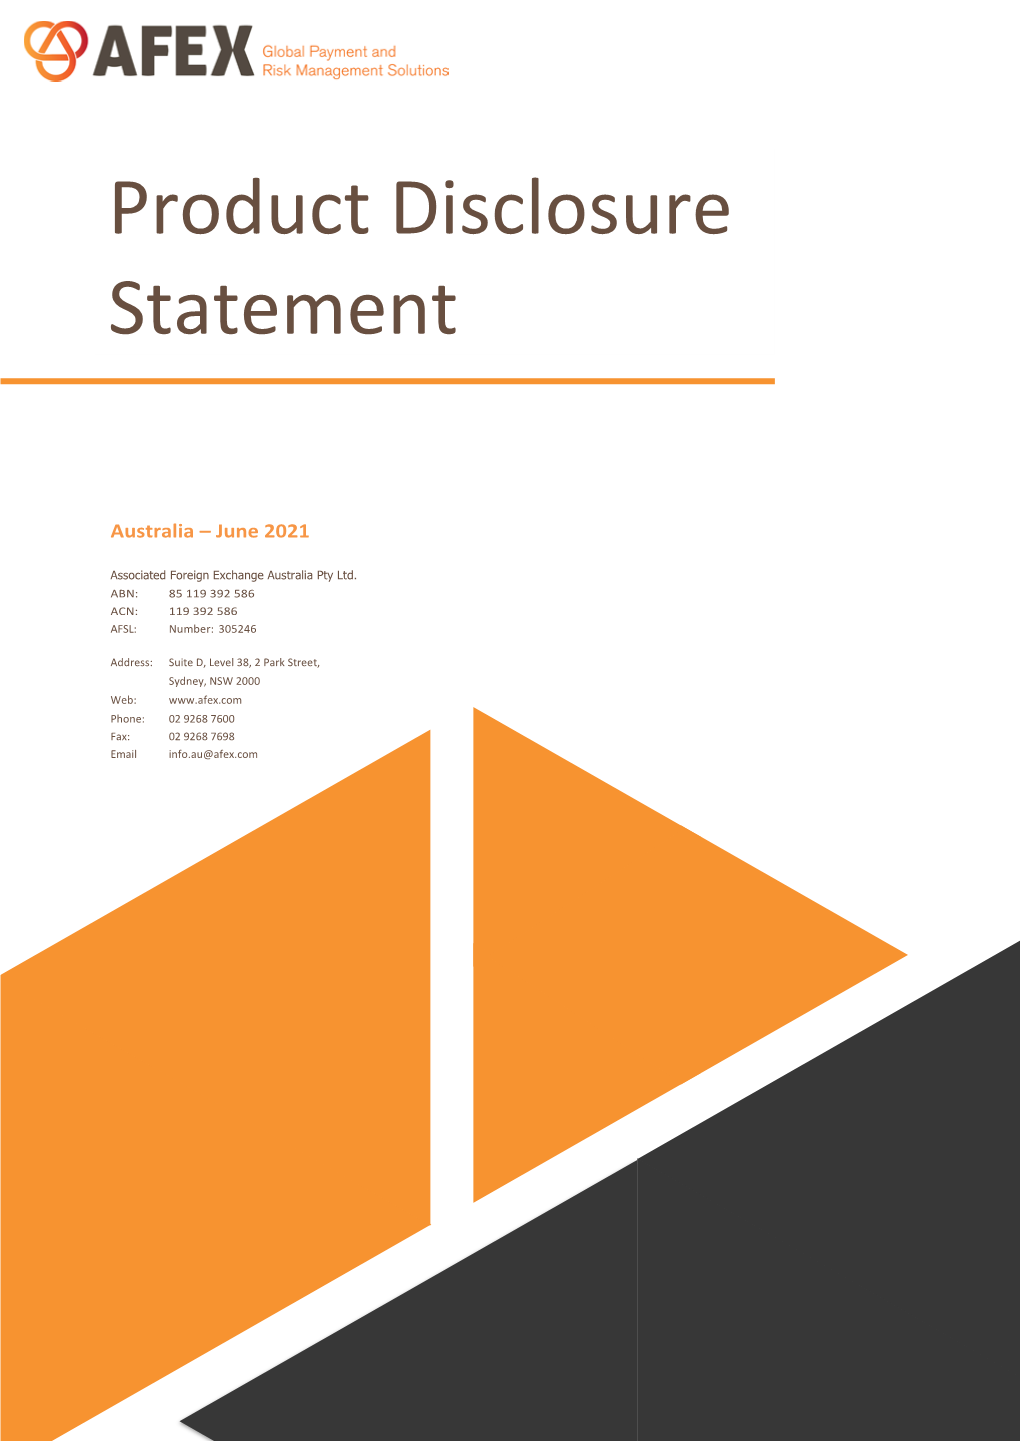 Product Disclosure Statement (PDS)